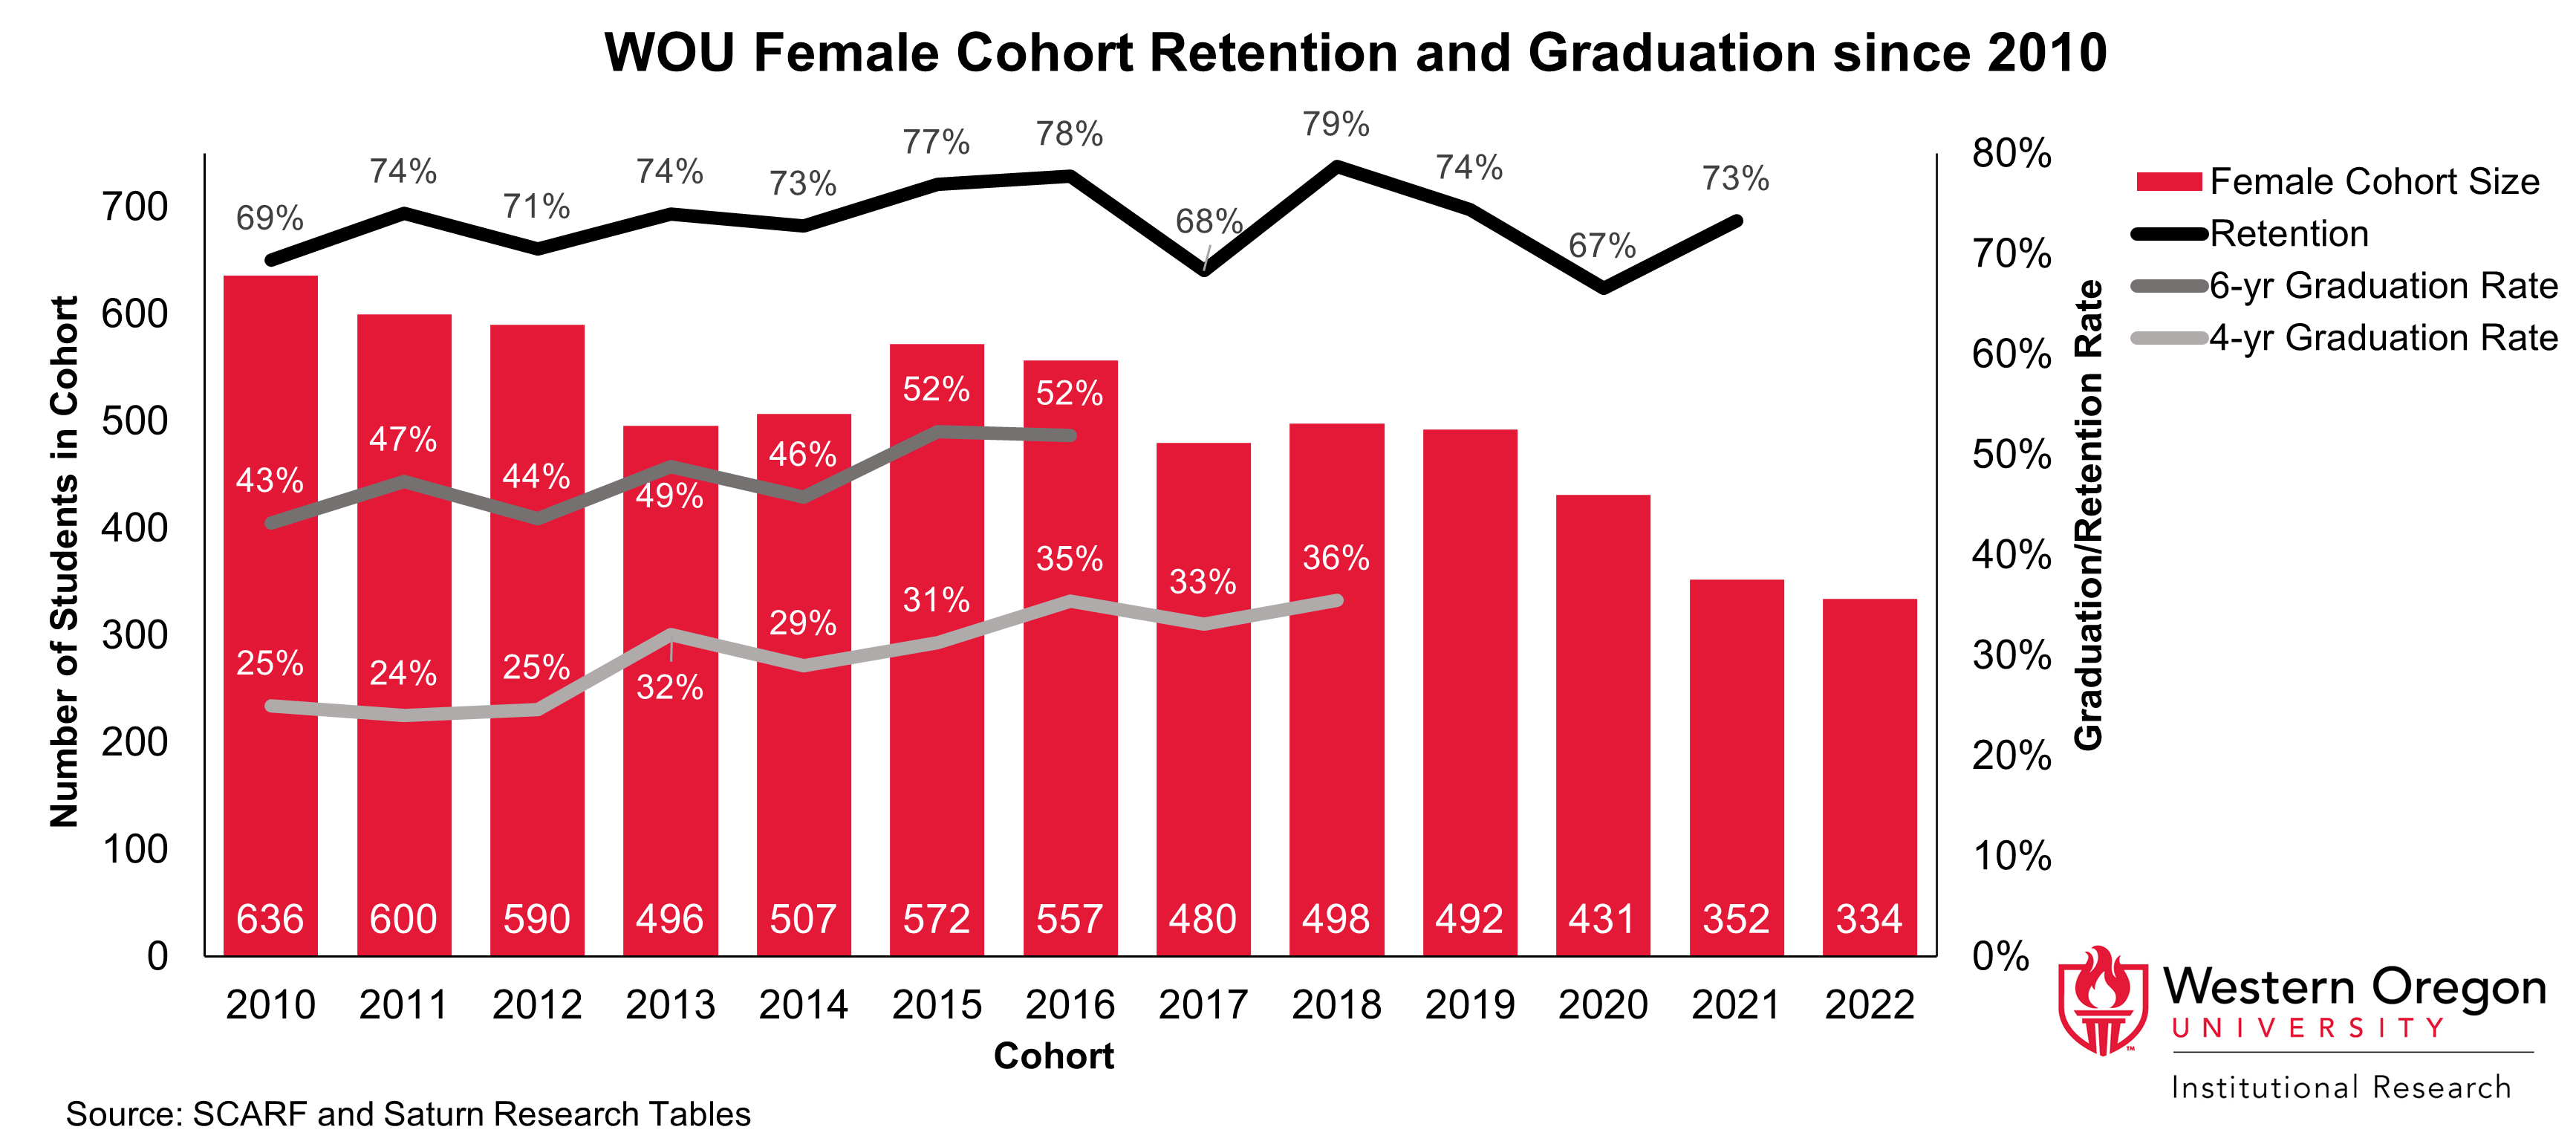 Bar and line graph of retention and 4- and 6-year graduation rates since 2010 for WOU students that are female, showing that graduation rates have been steadily increasing while retention rates have remained largely stable